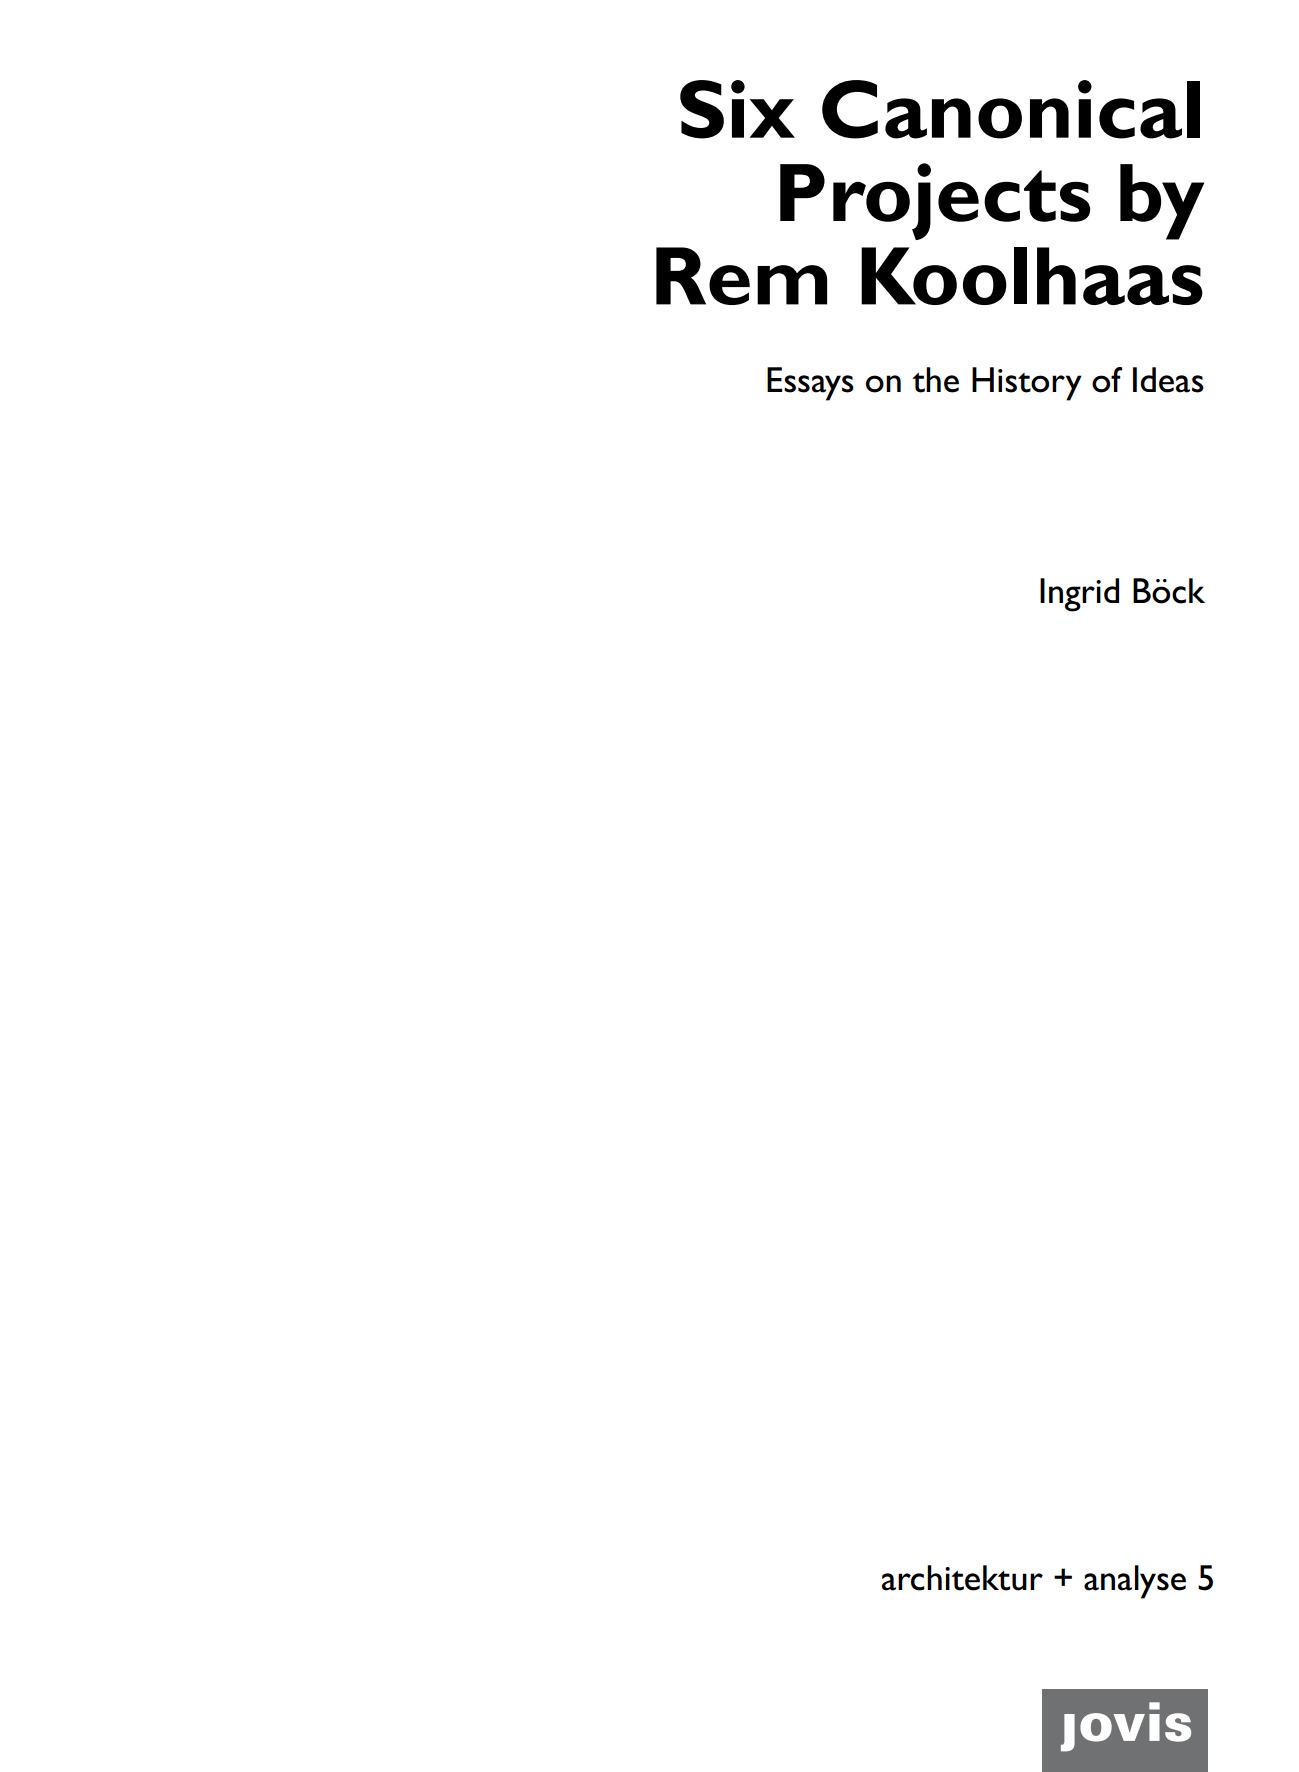 Six Canonical Projects by Rem Koolhaas : Essays on the History of Ideas / Ingrid Böck. — Berlin : jovis Verlag GmbH, 2015